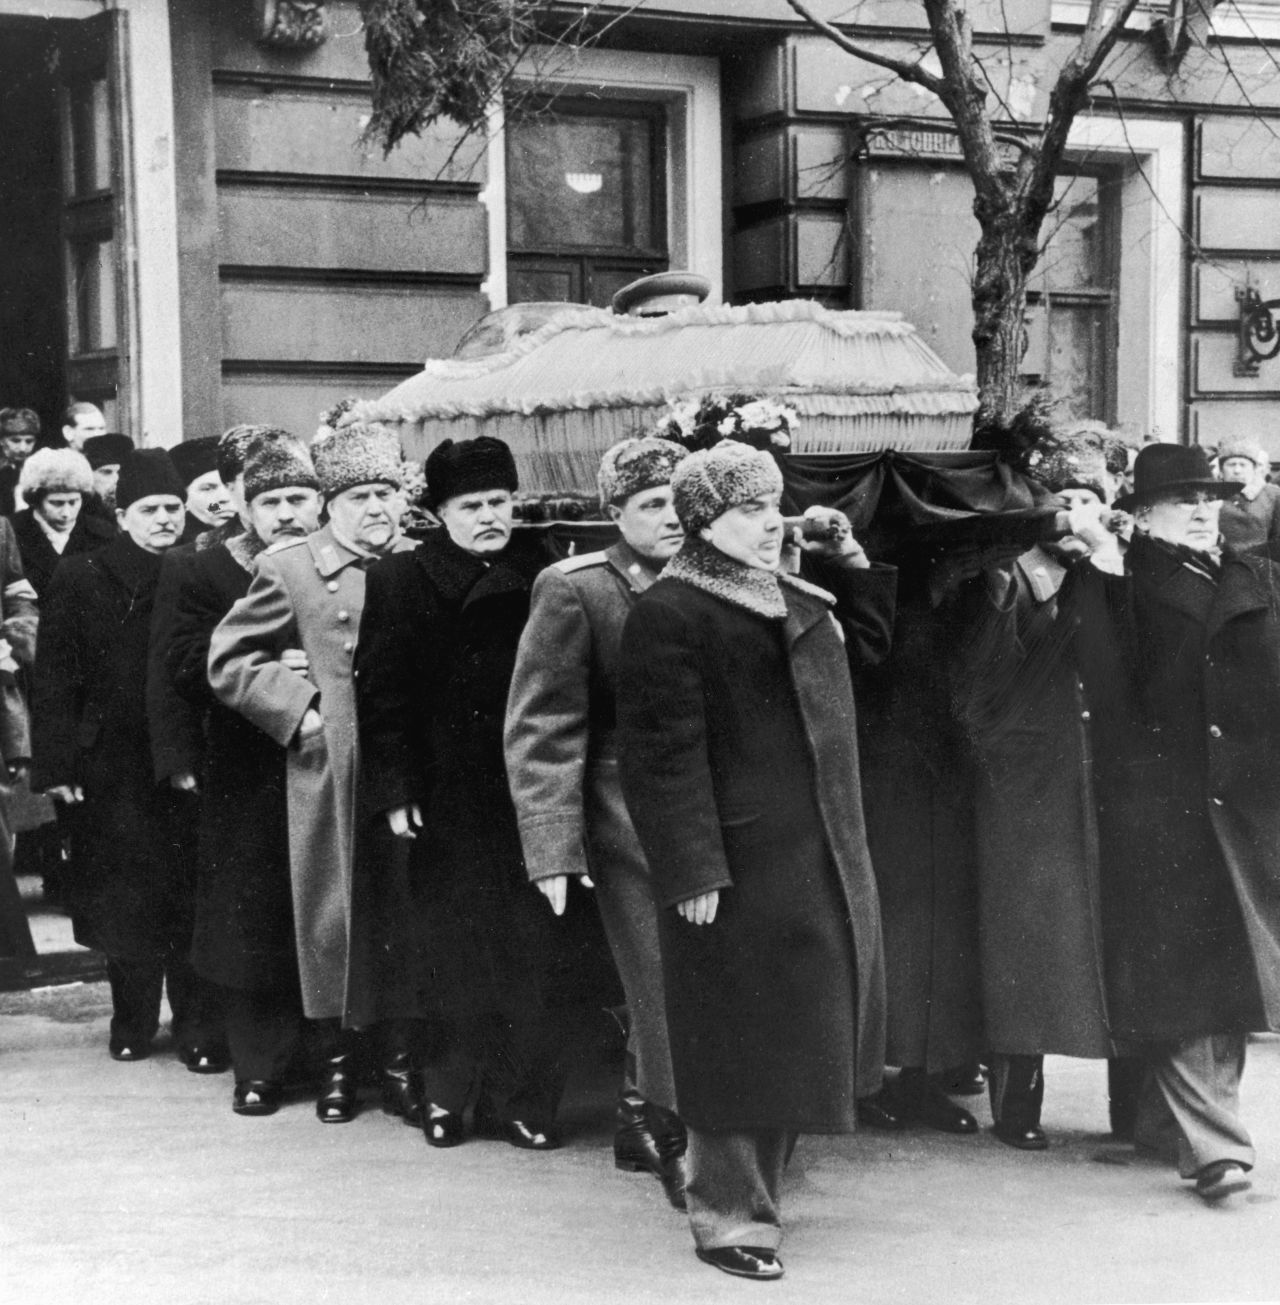 The coffin of Soviet political leader Joseph Stalin, who died in 1953, is carried from the House of Trade Unions in Moscow.